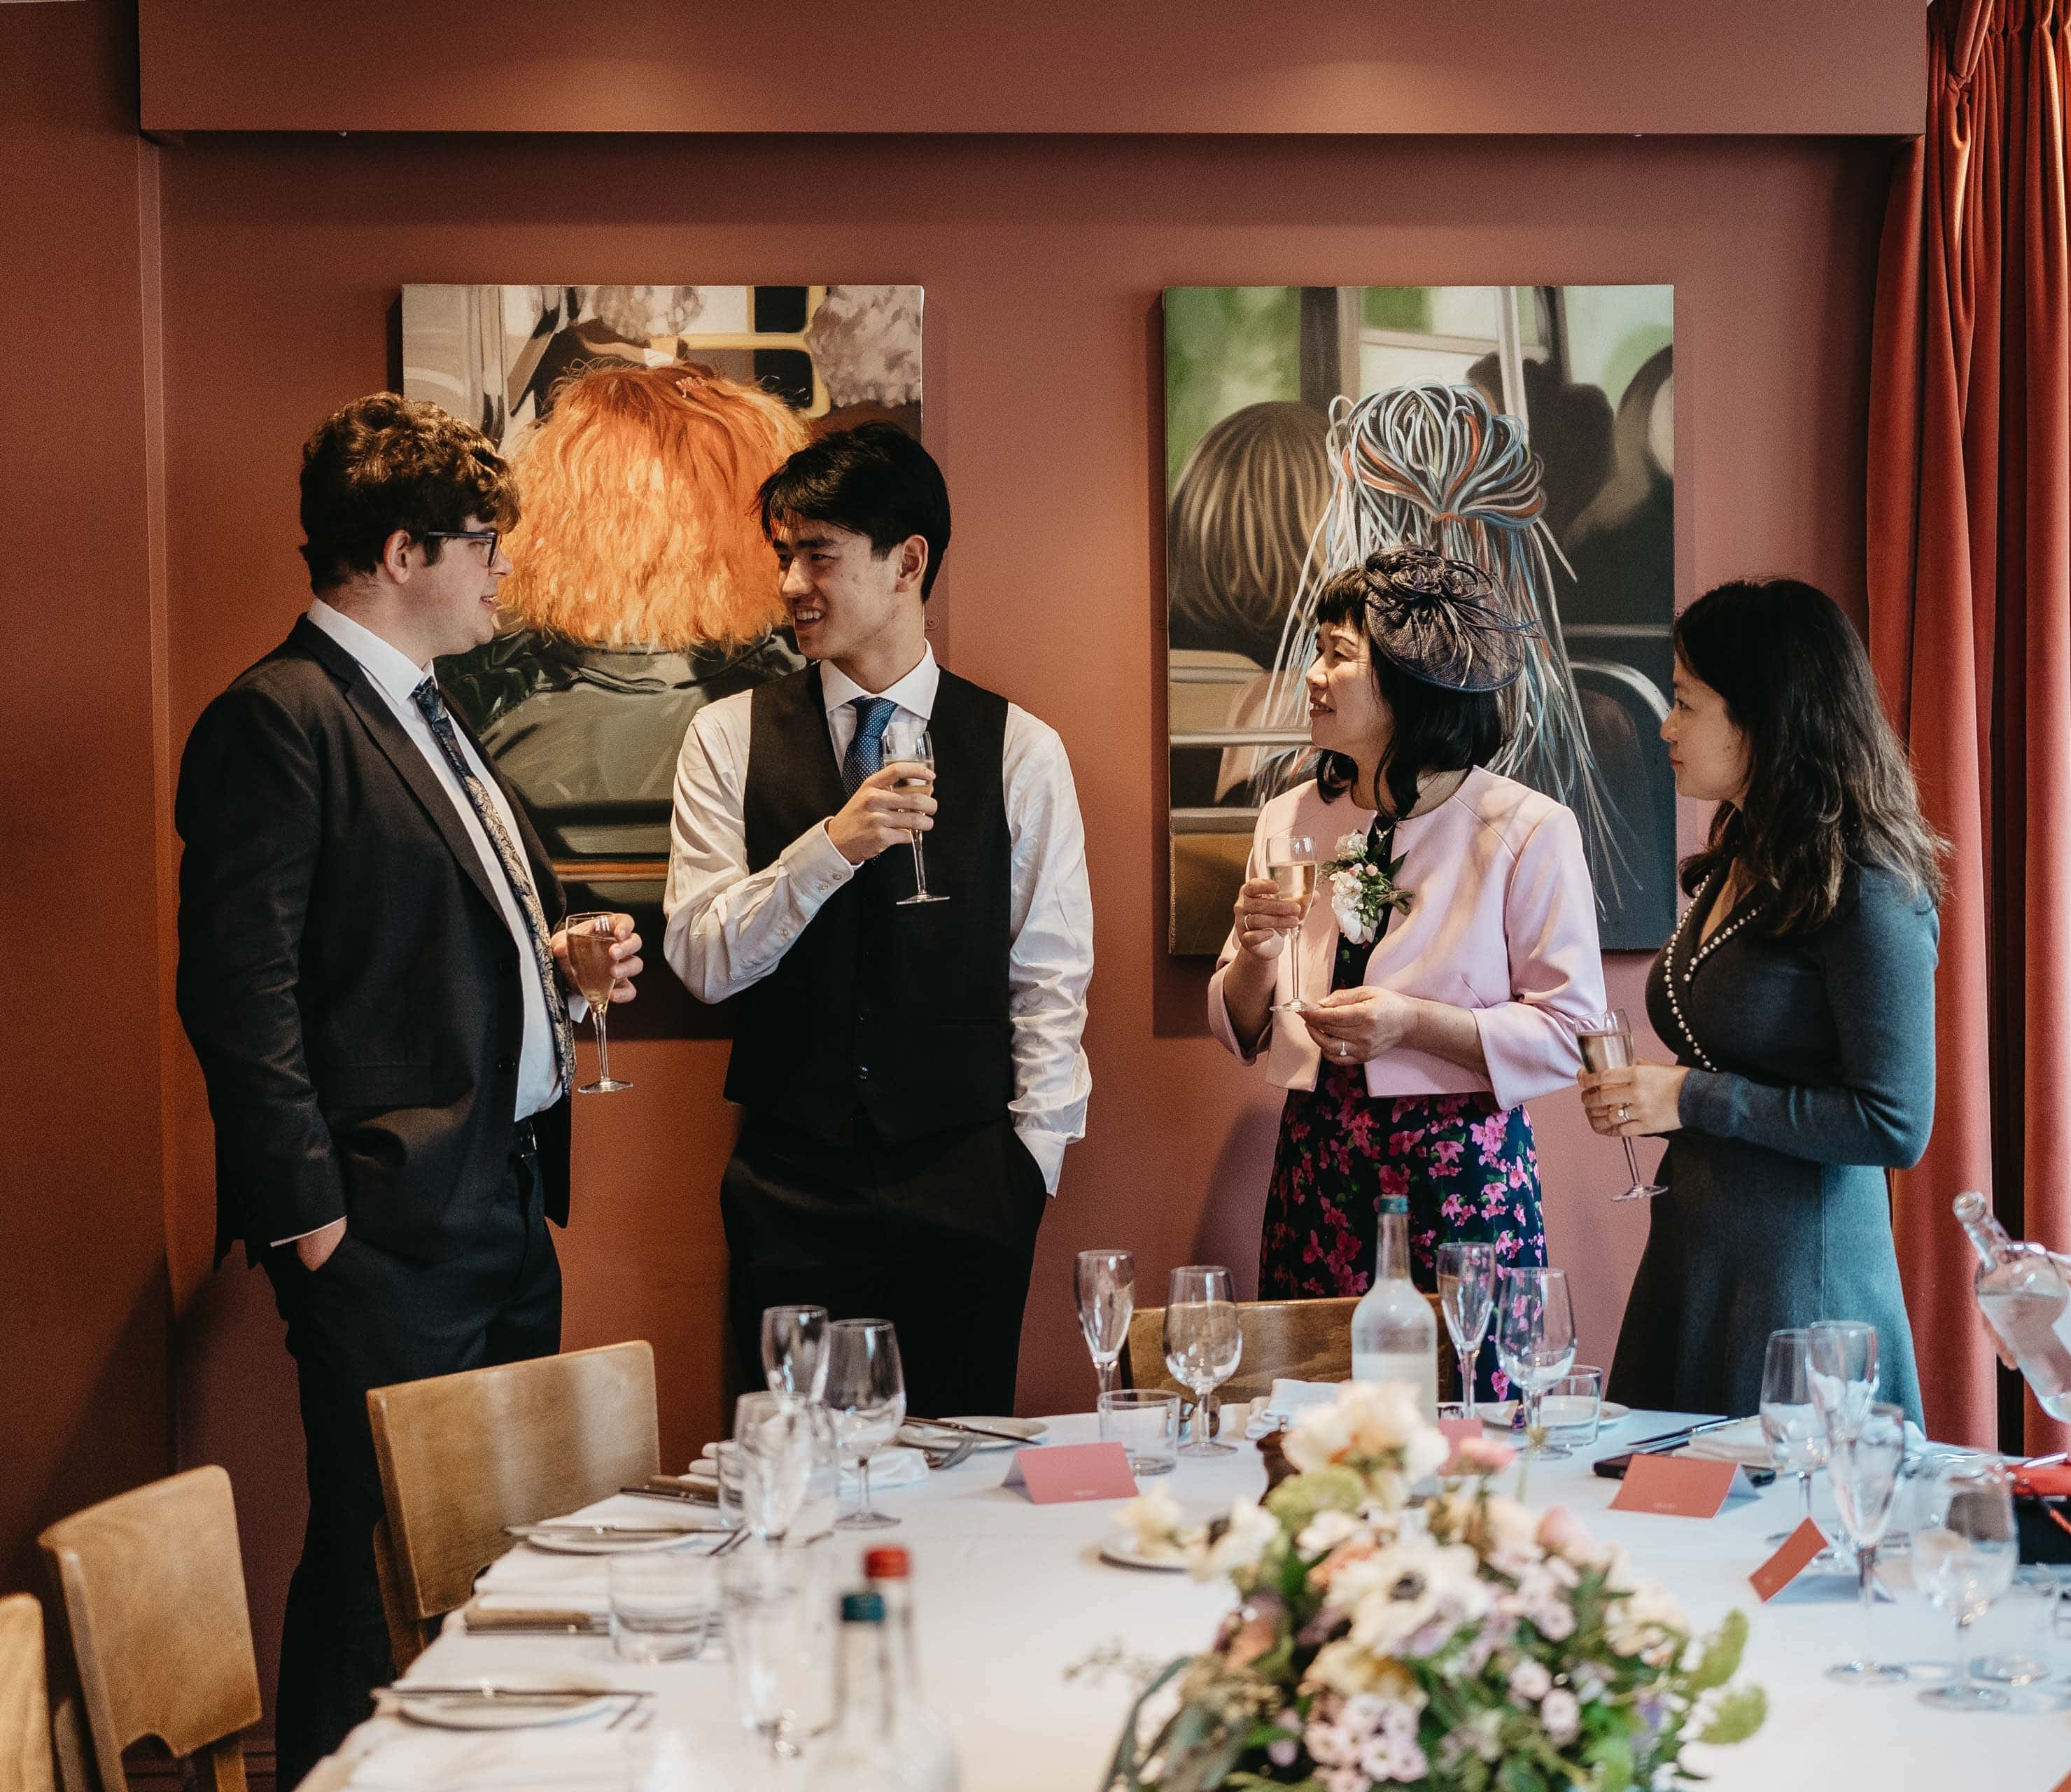 ConnieAndrewcolour-210-2022-Quod-Restaurant-Bar-Oxford-High-Res-Red-Room-Private-Dining-Wedding-Celebration-Friends-Family-Web-Hero-aspect-ratio-2959-2560